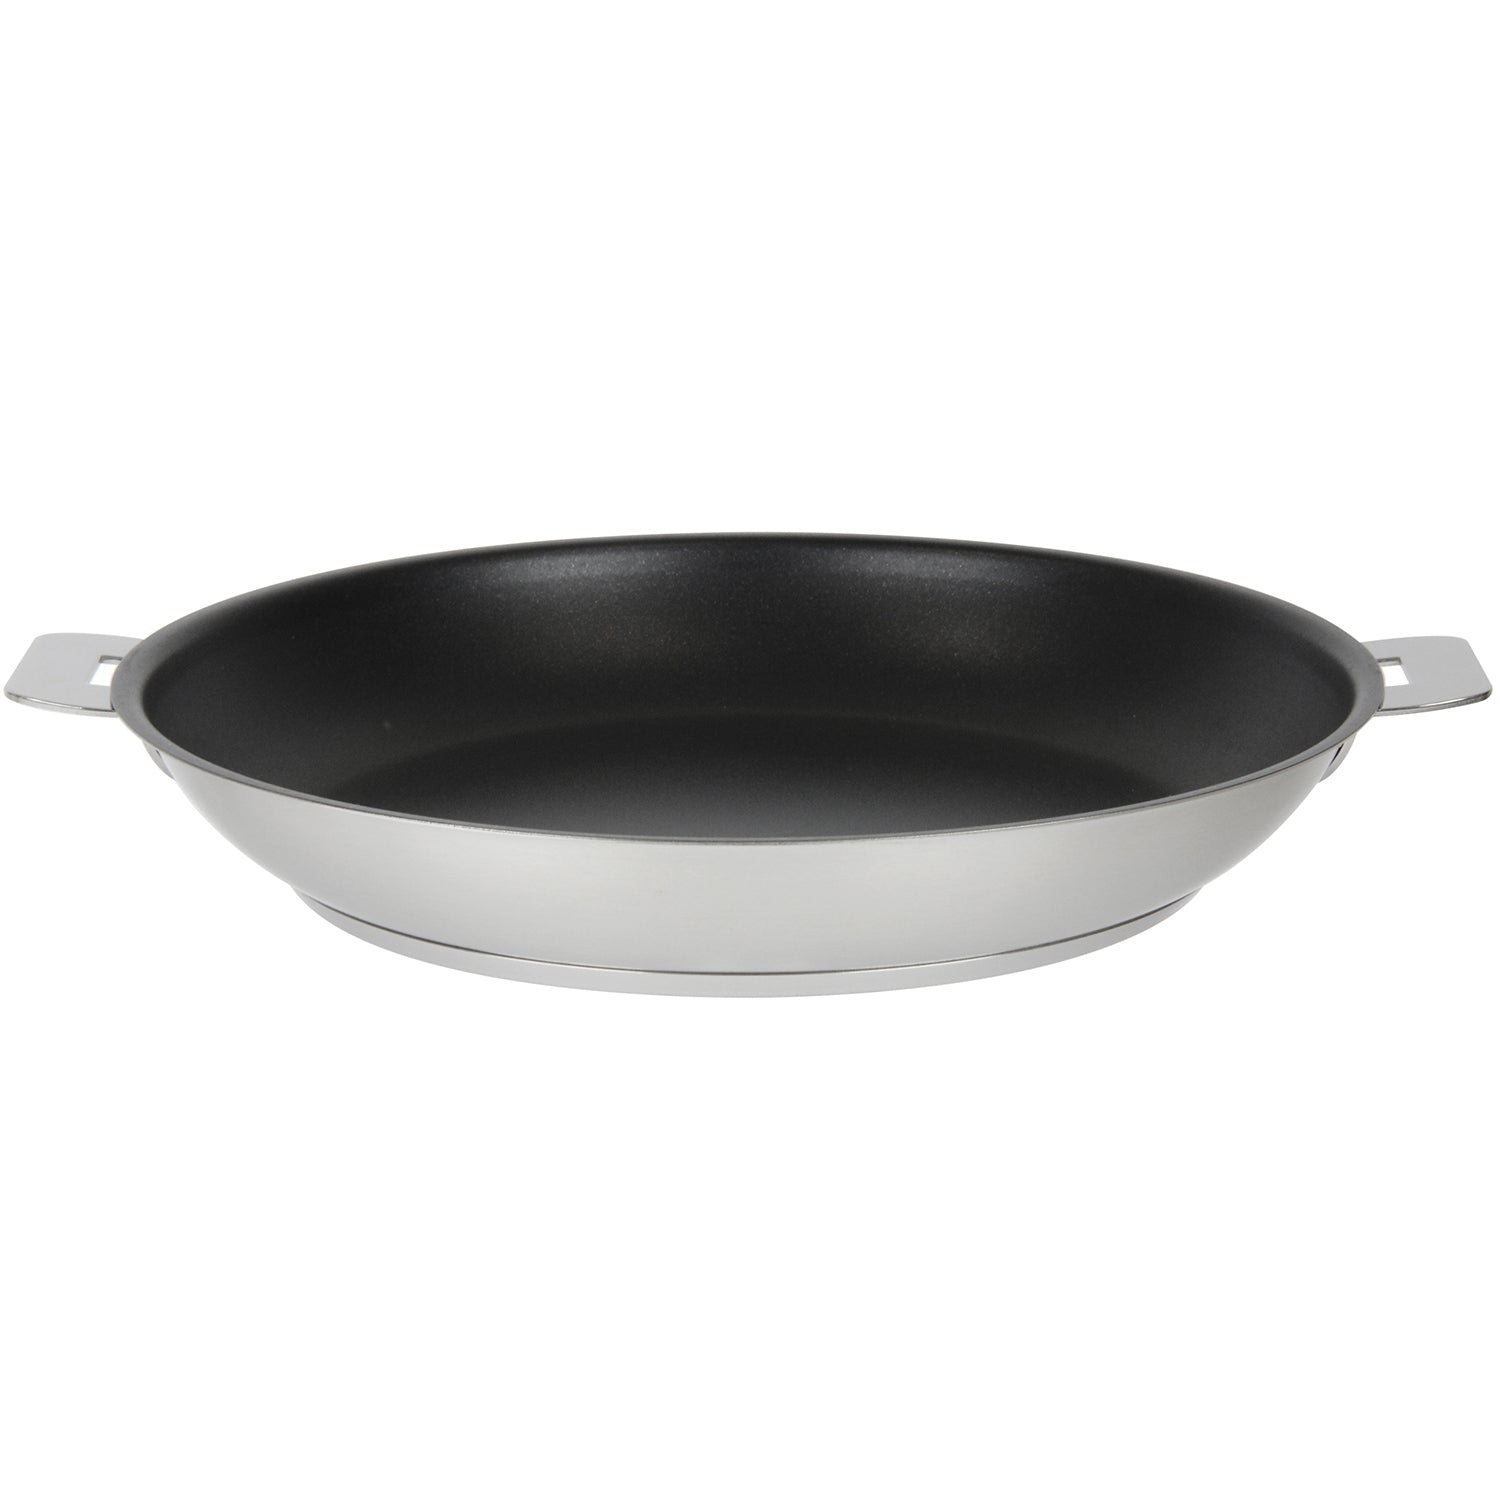 Stainless deep frying pan - Strate removable handle, Frying pans - Cristel